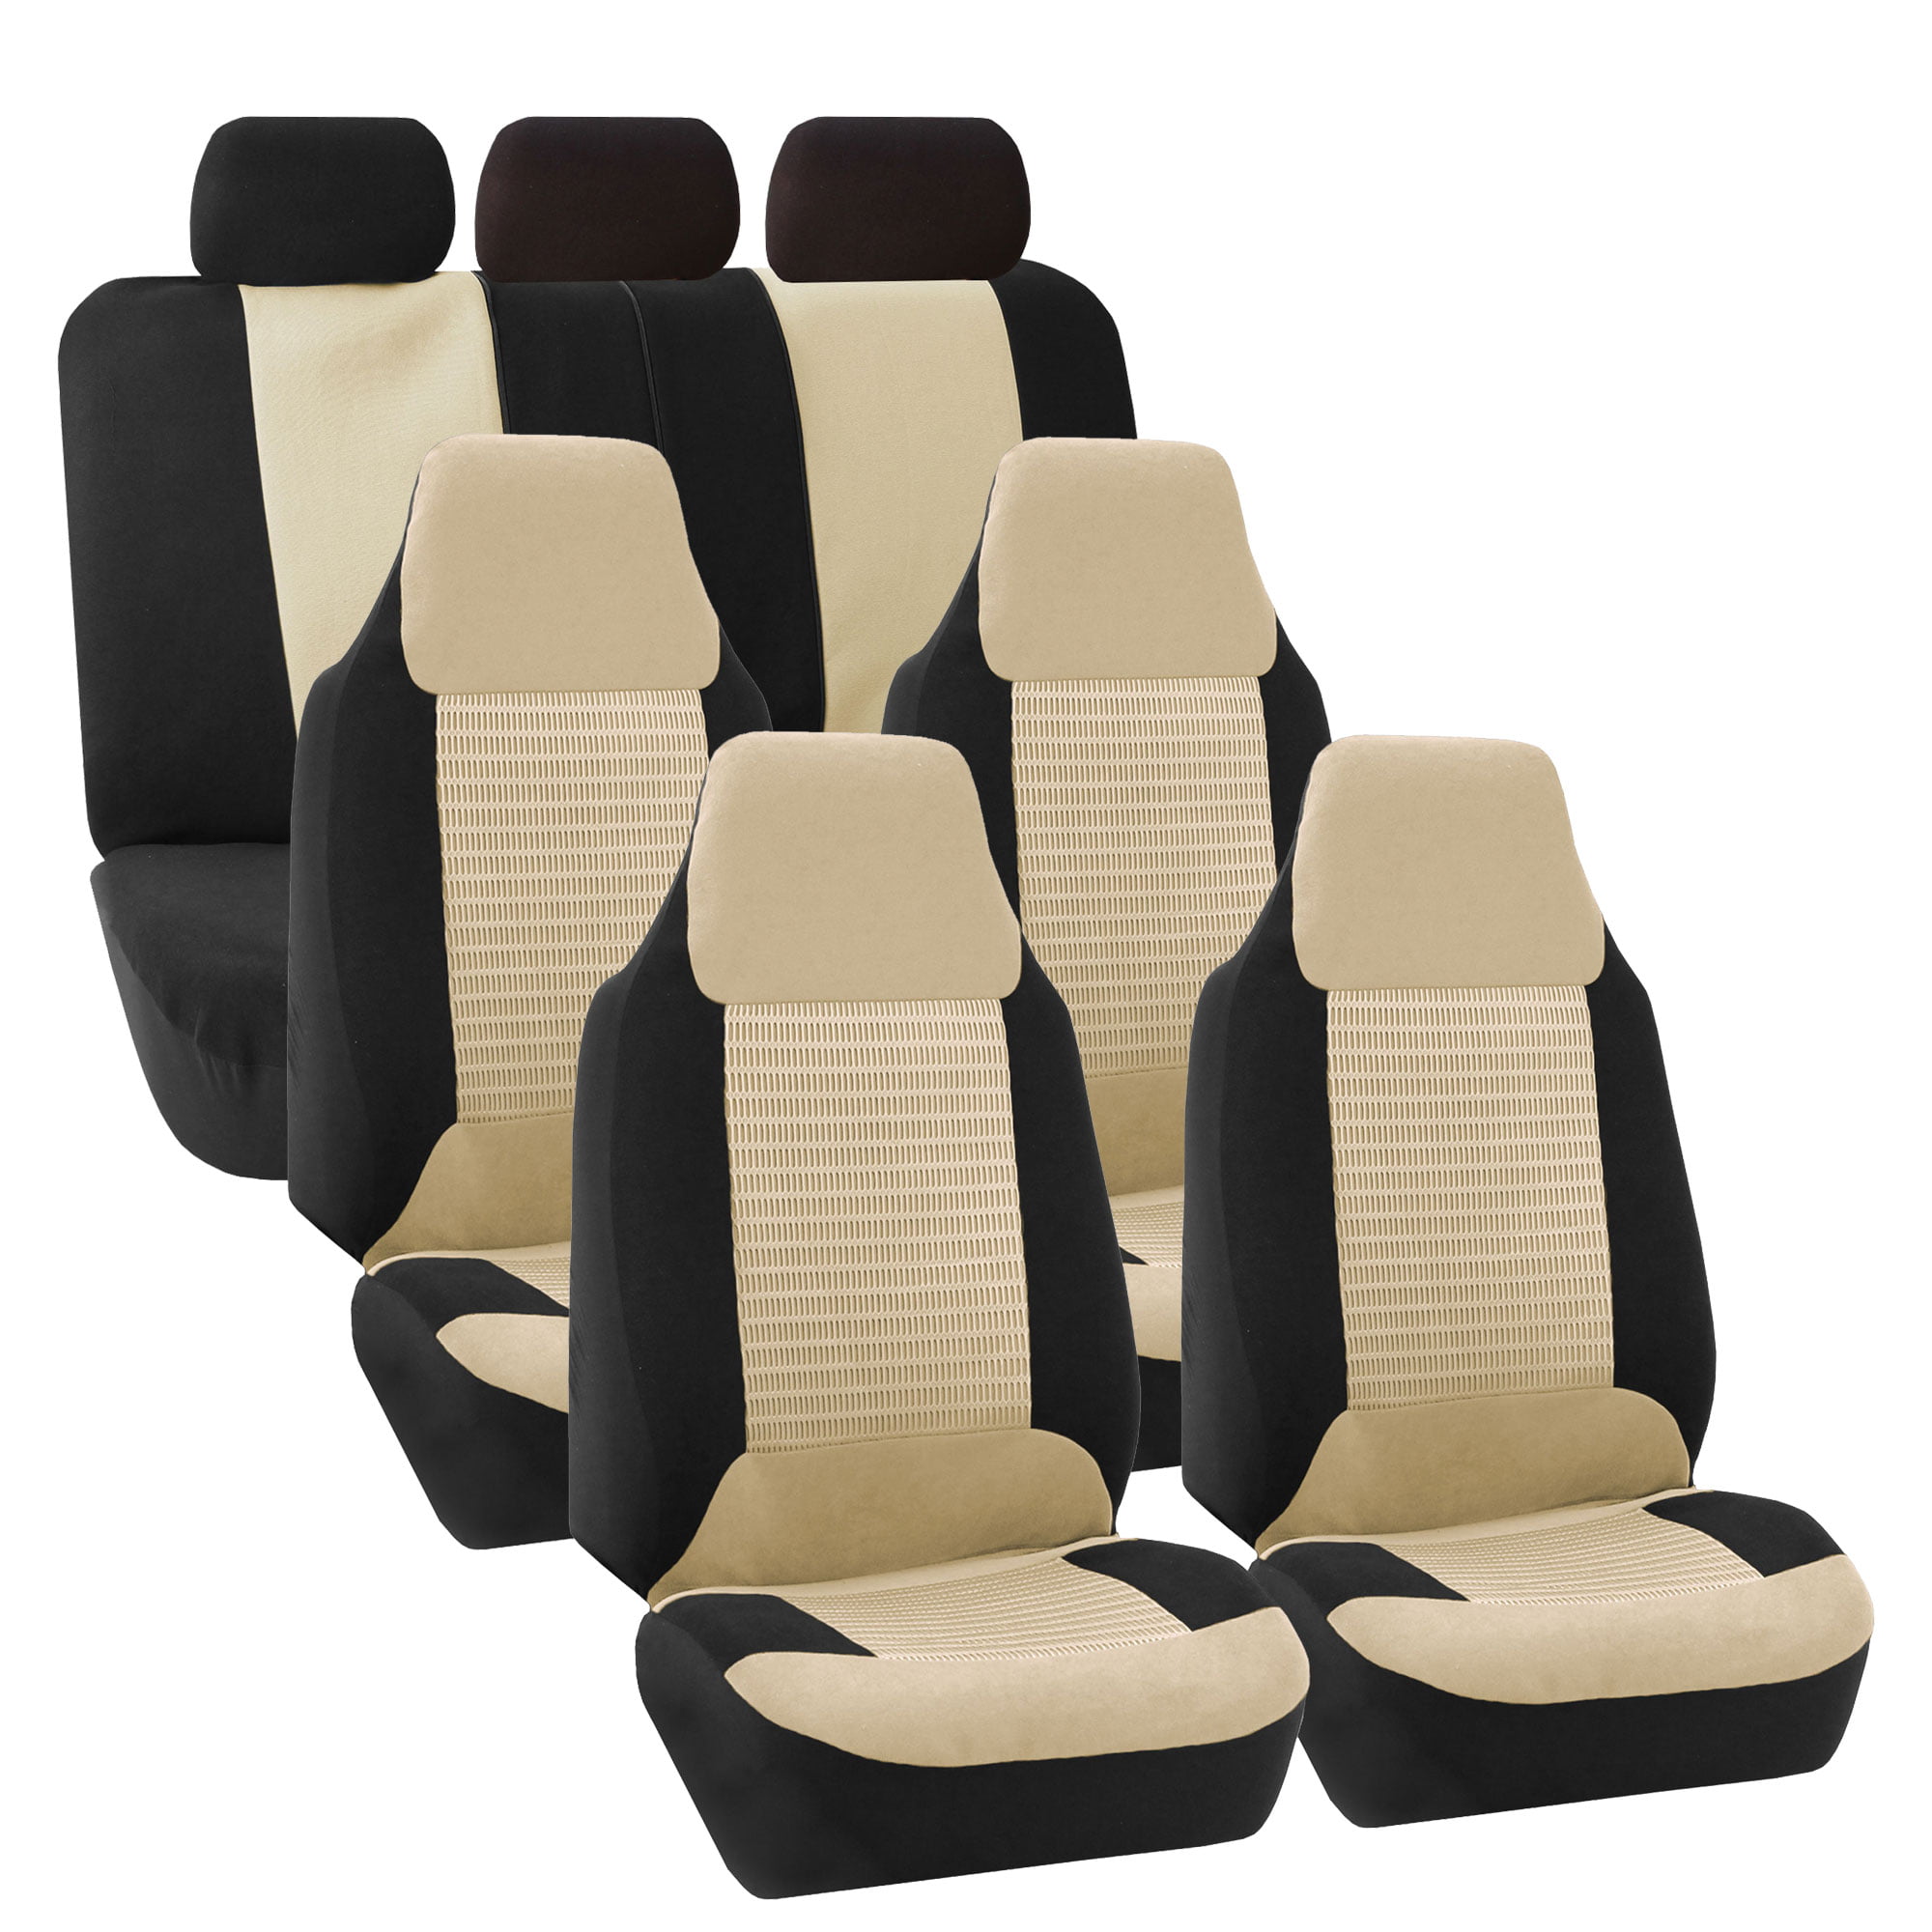 FH Group 3 Row Highback Trendy Corduroy Car Seat Covers for Car SUV, 7